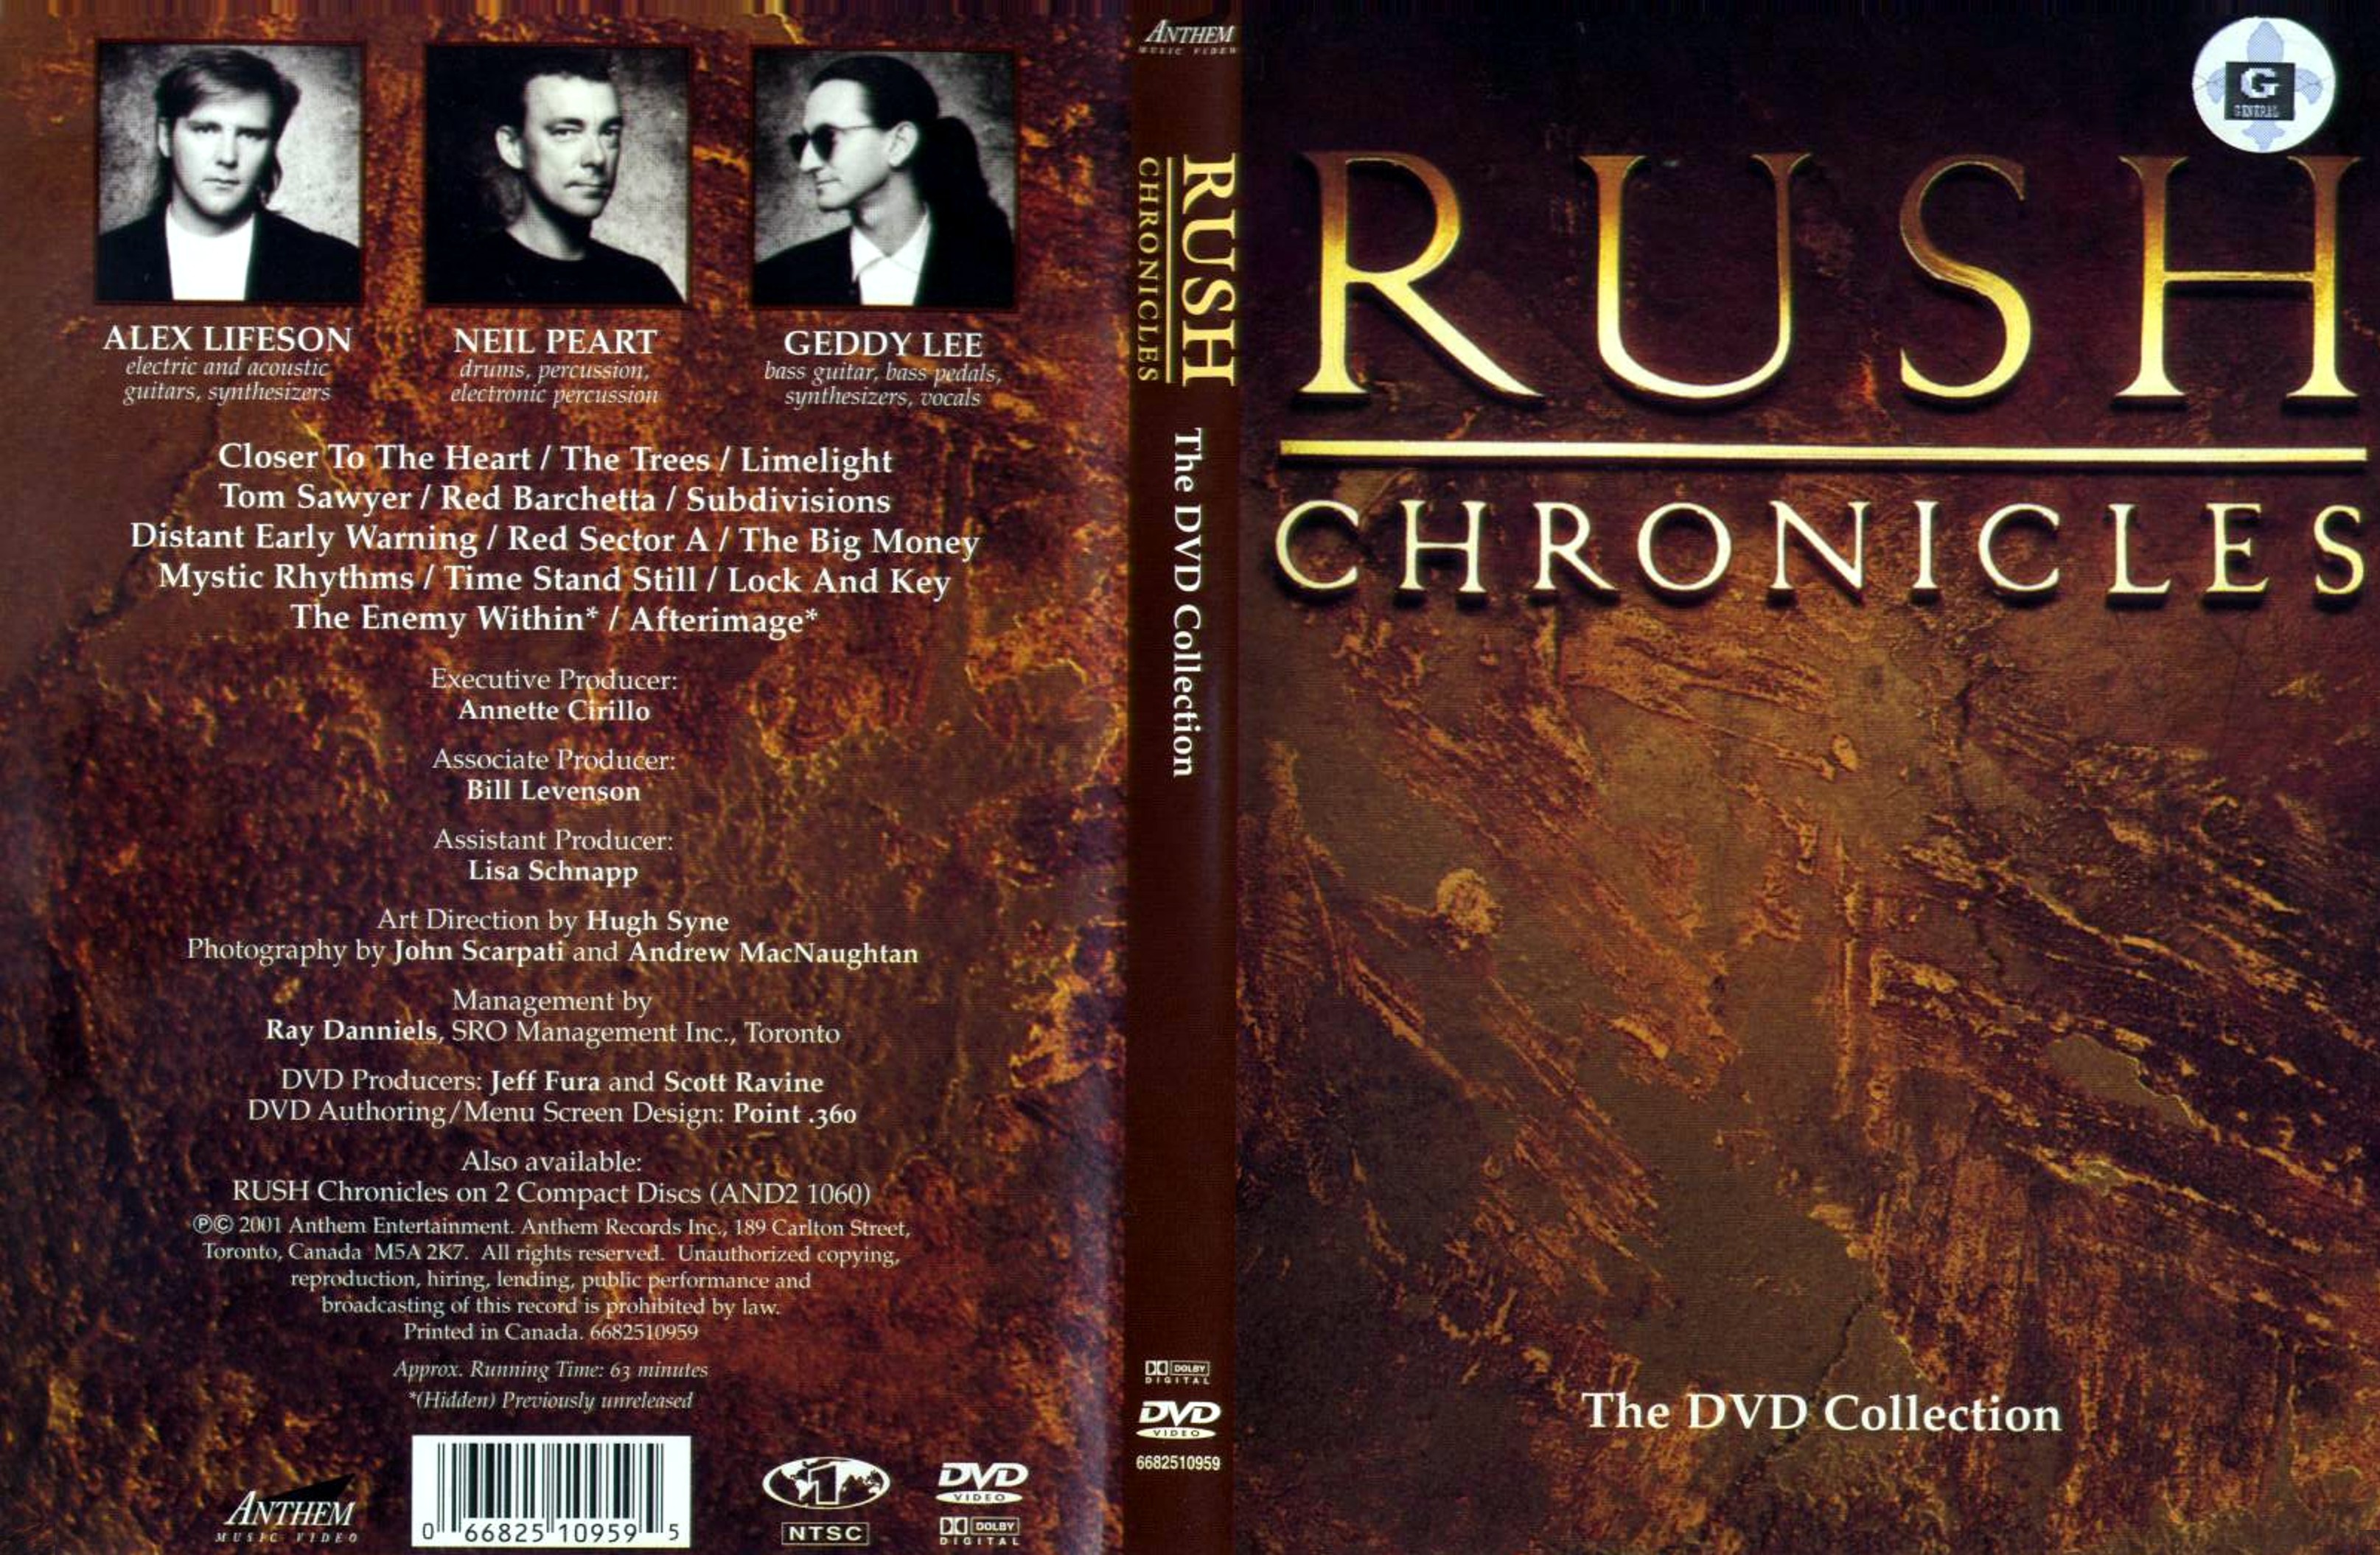 Jaquette DVD Rush Chronicles